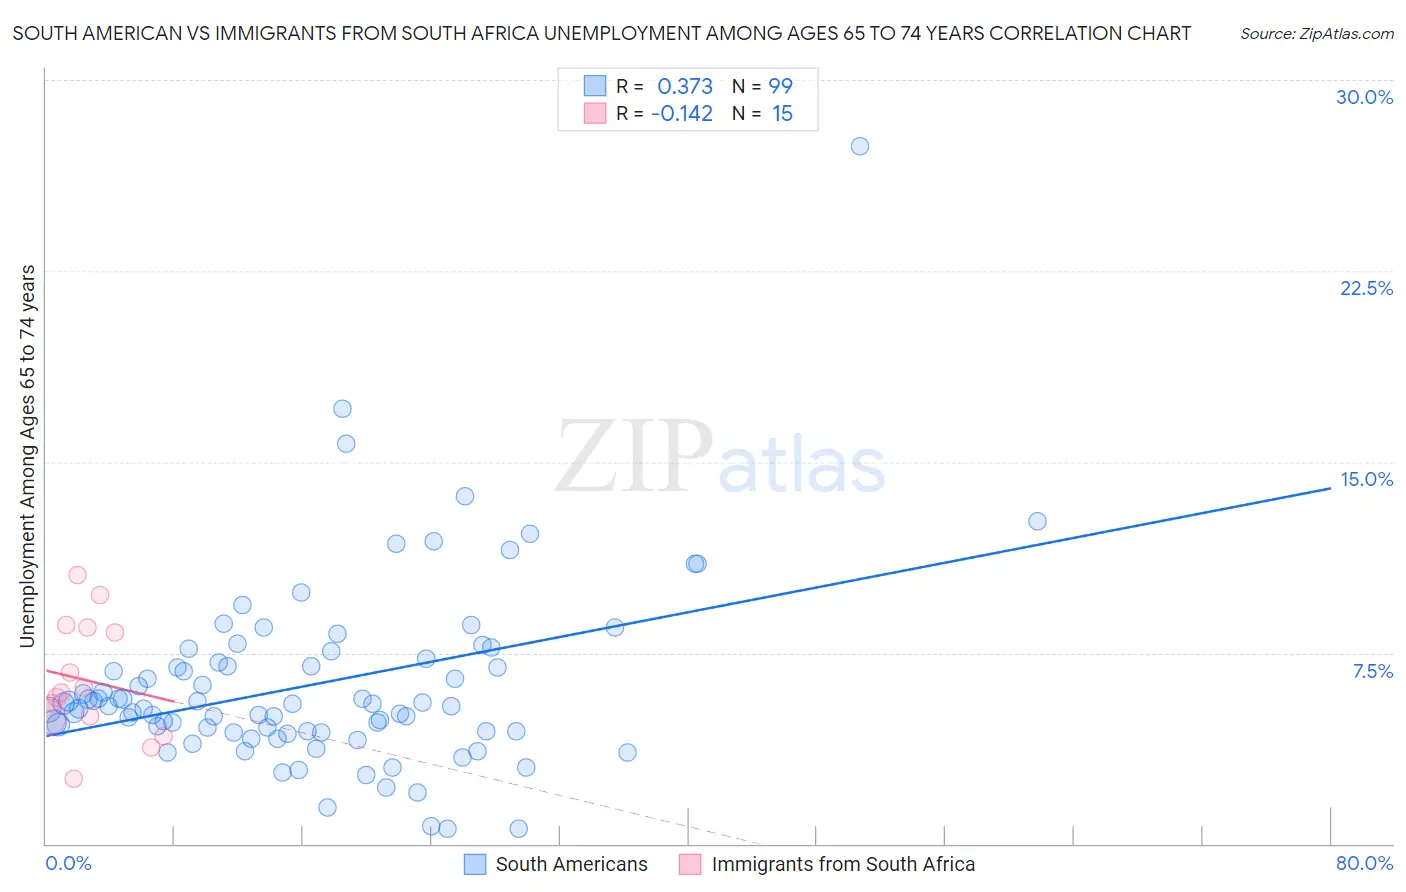 South American vs Immigrants from South Africa Unemployment Among Ages 65 to 74 years